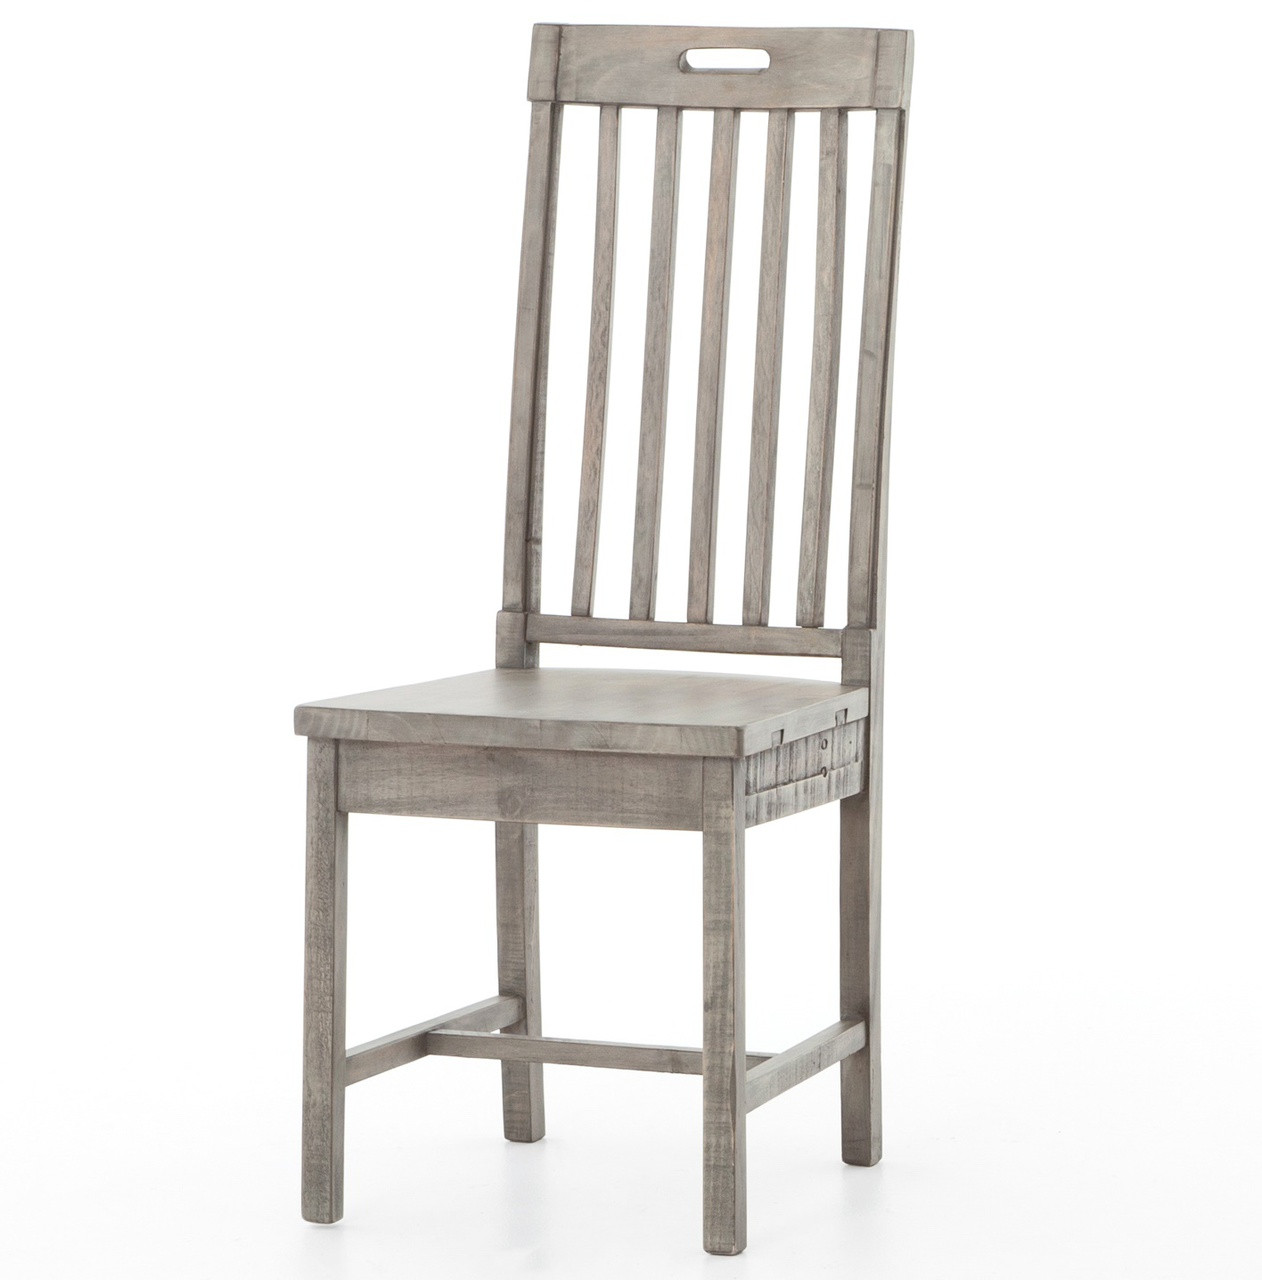 Cintra Rustic Reclaimed Wood Dining Room Chair- Gray | Zin ...